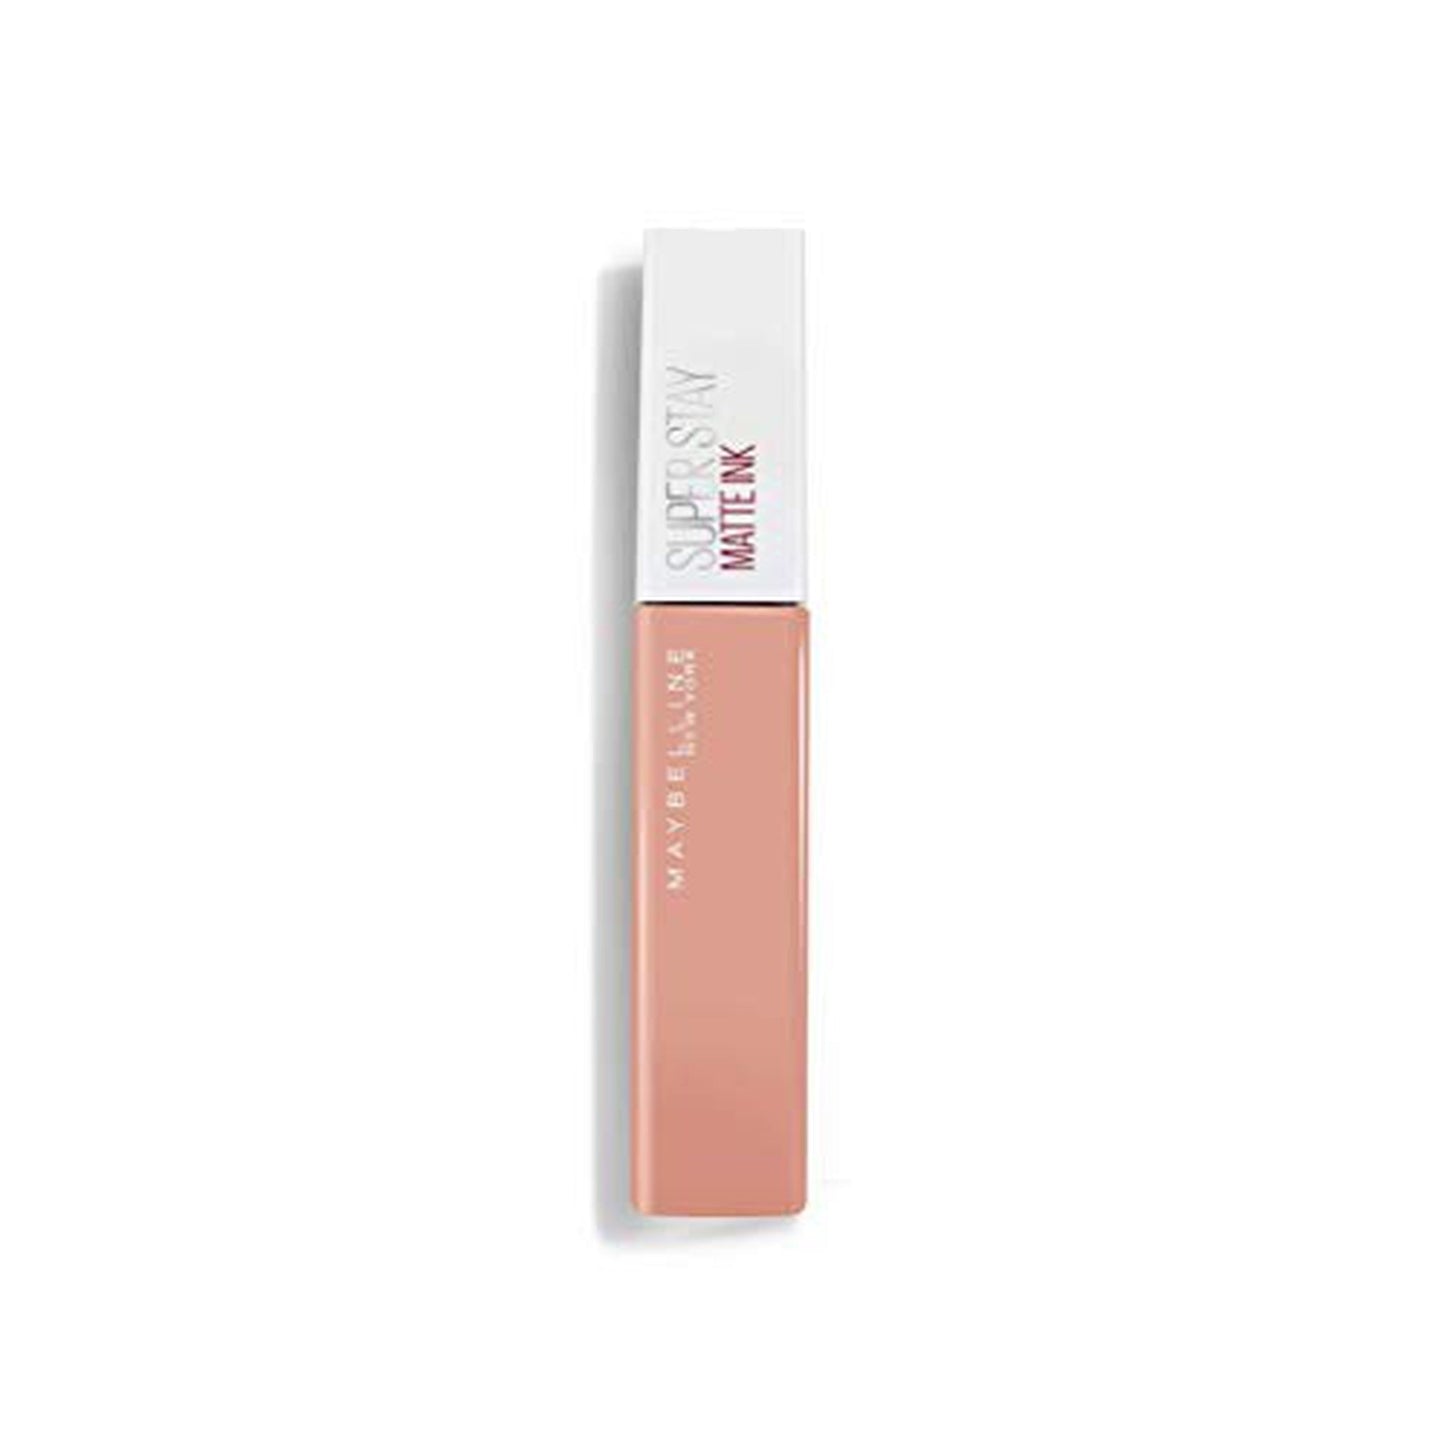 MAYBELLINE SuperStay Matte Ink - 55 Driver-Maybelline-BeautyNmakeup.co.uk